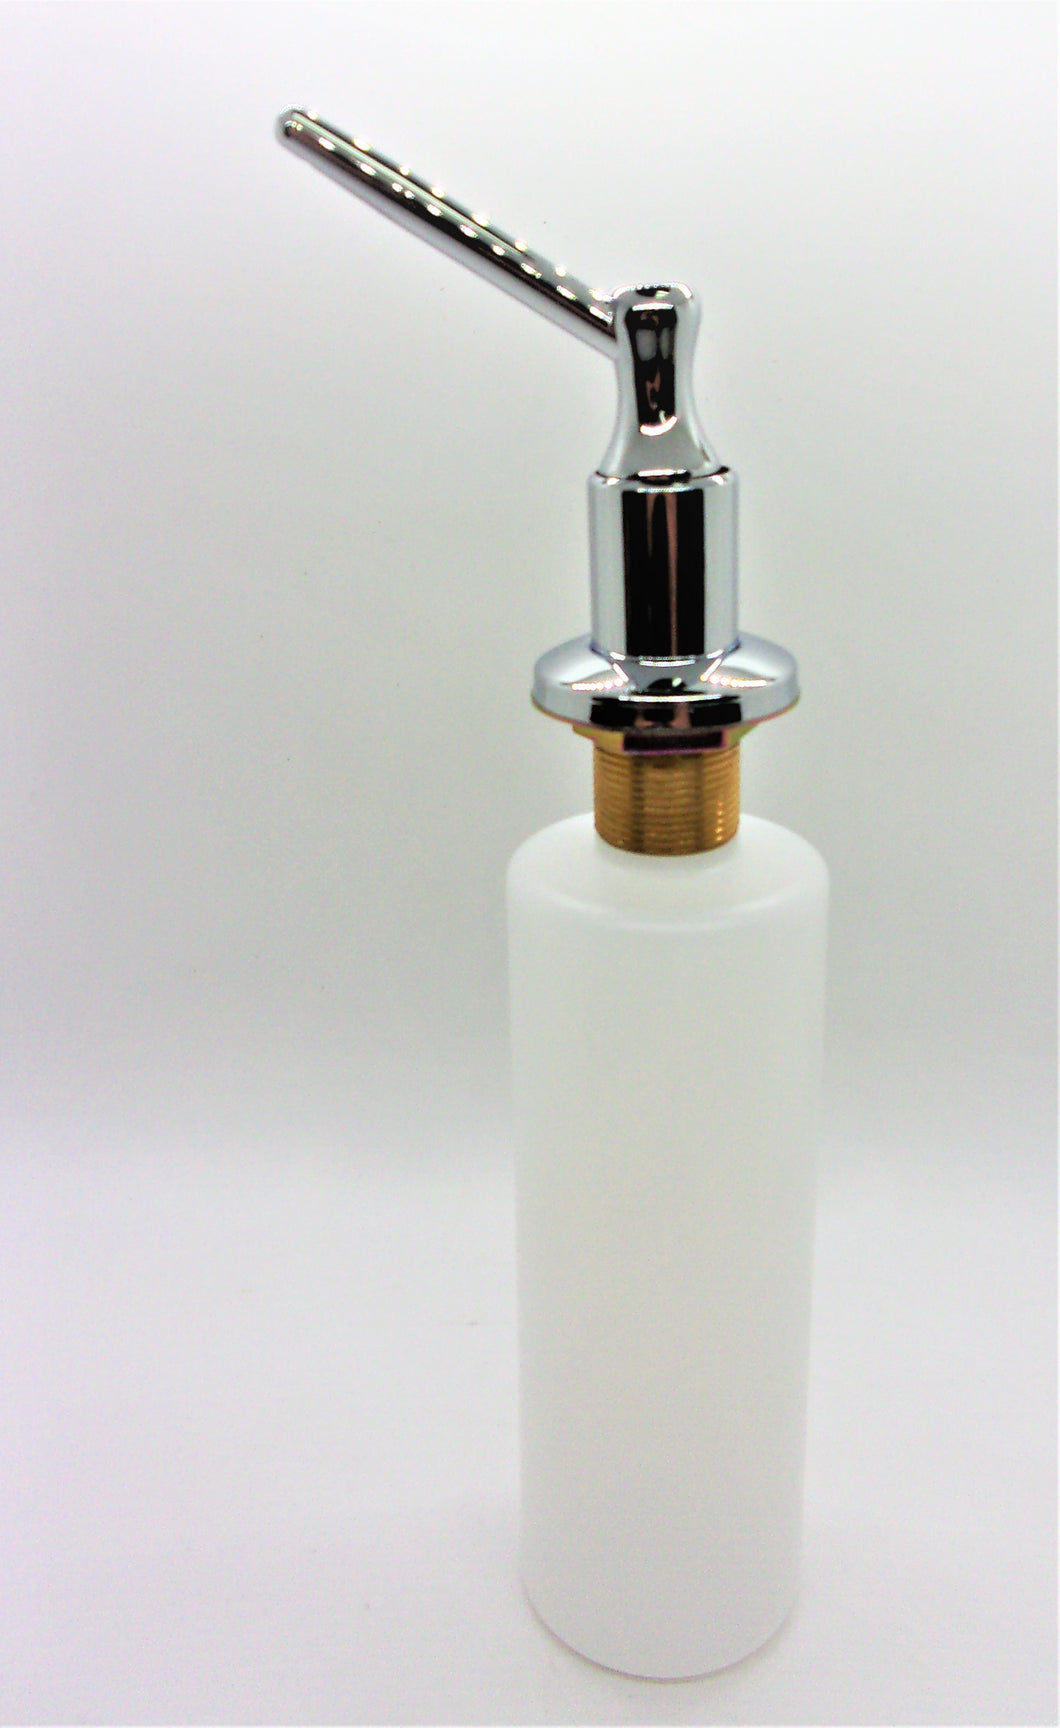 LDR 501 P1050CP Deluxe Soap/Lotion Dispenser for Kitchen or Lavatory Sink, Chrome